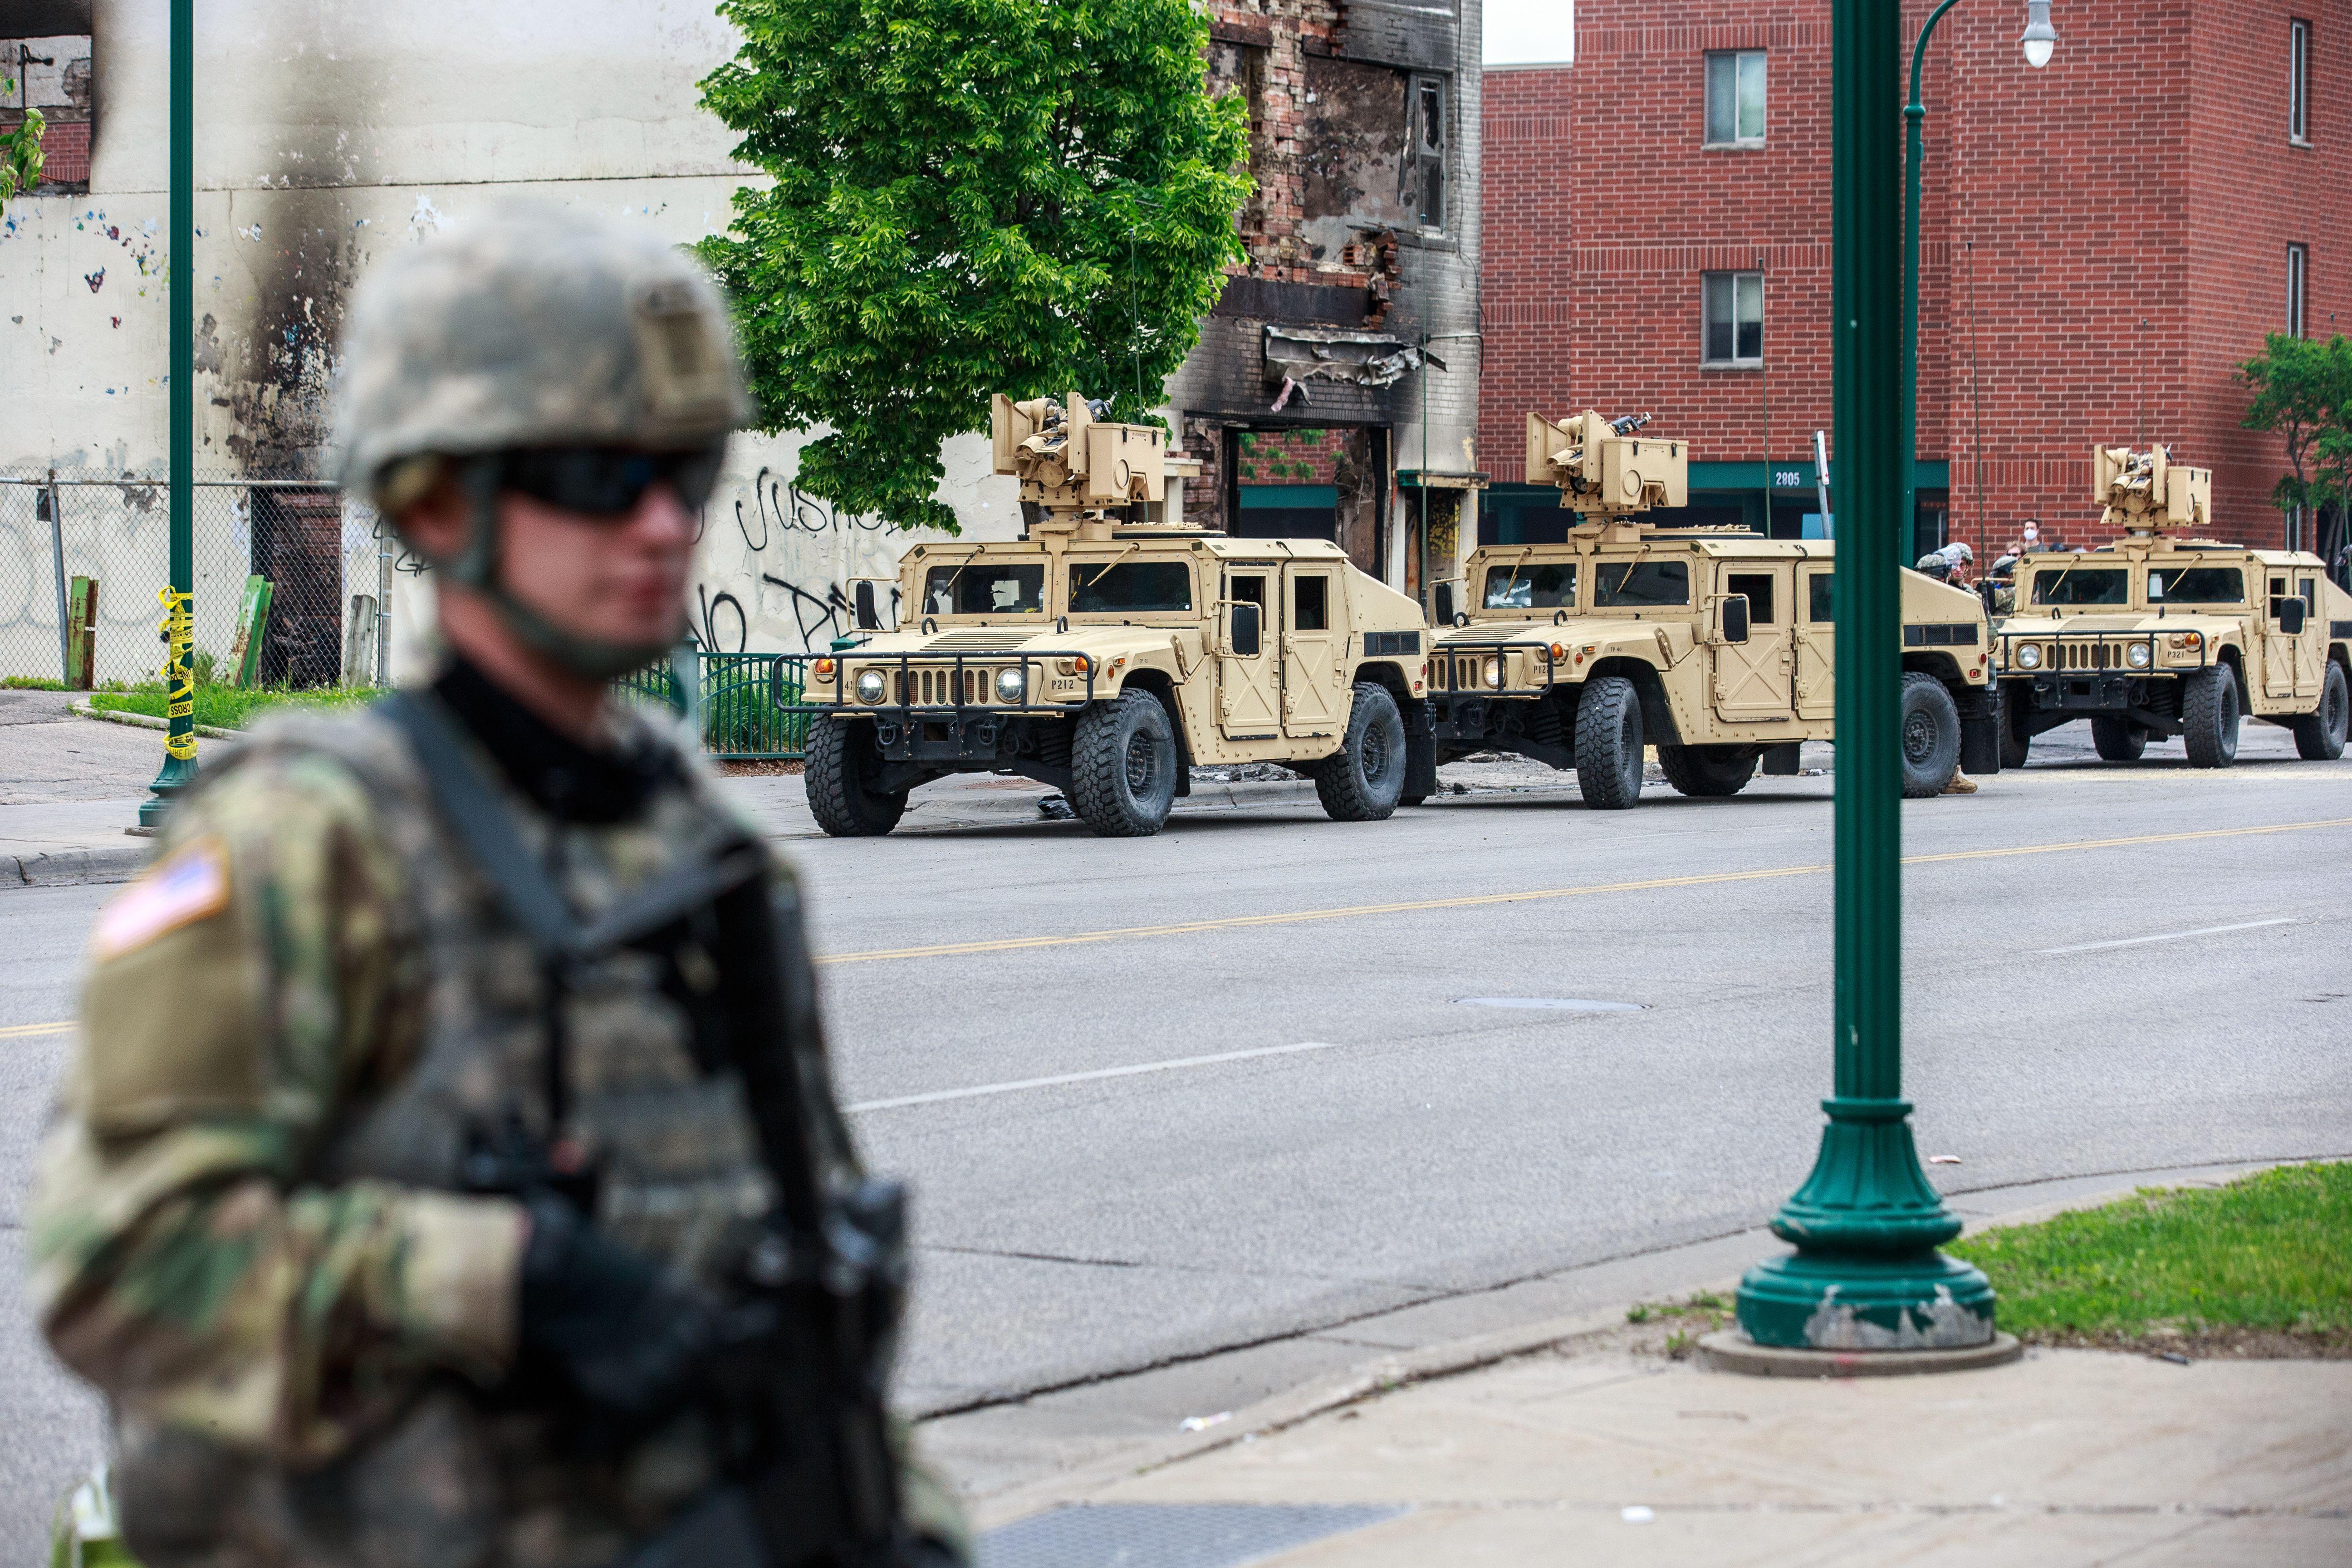 Armored vehicles roll down the streets of Minneapolis. A uniformed guardsman stands in the foreground.